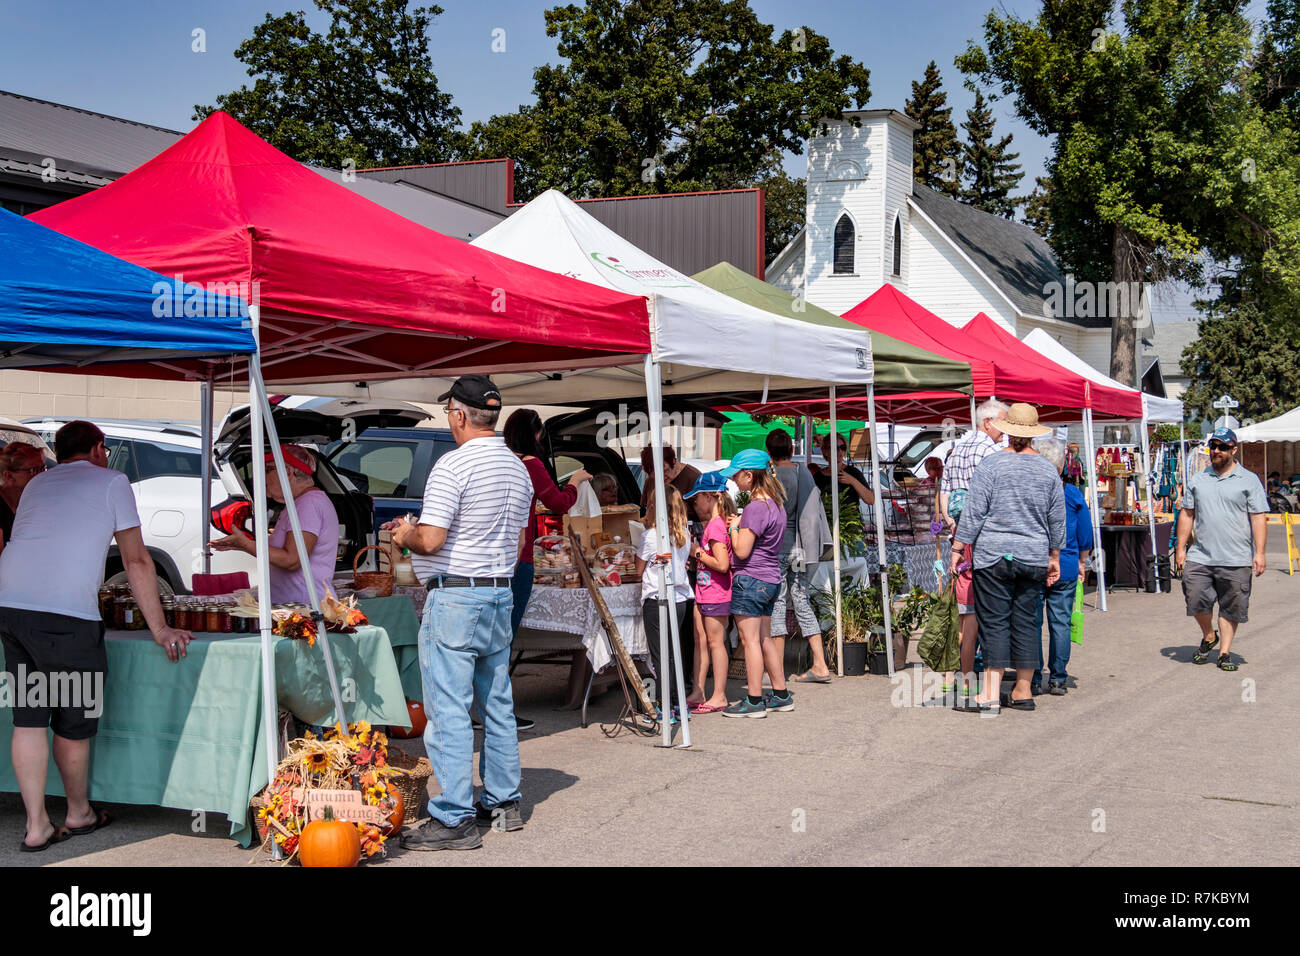 Craft table kiosks at the Corn and Apple Festival in Morden, Manitoba, Canada. Stock Photo